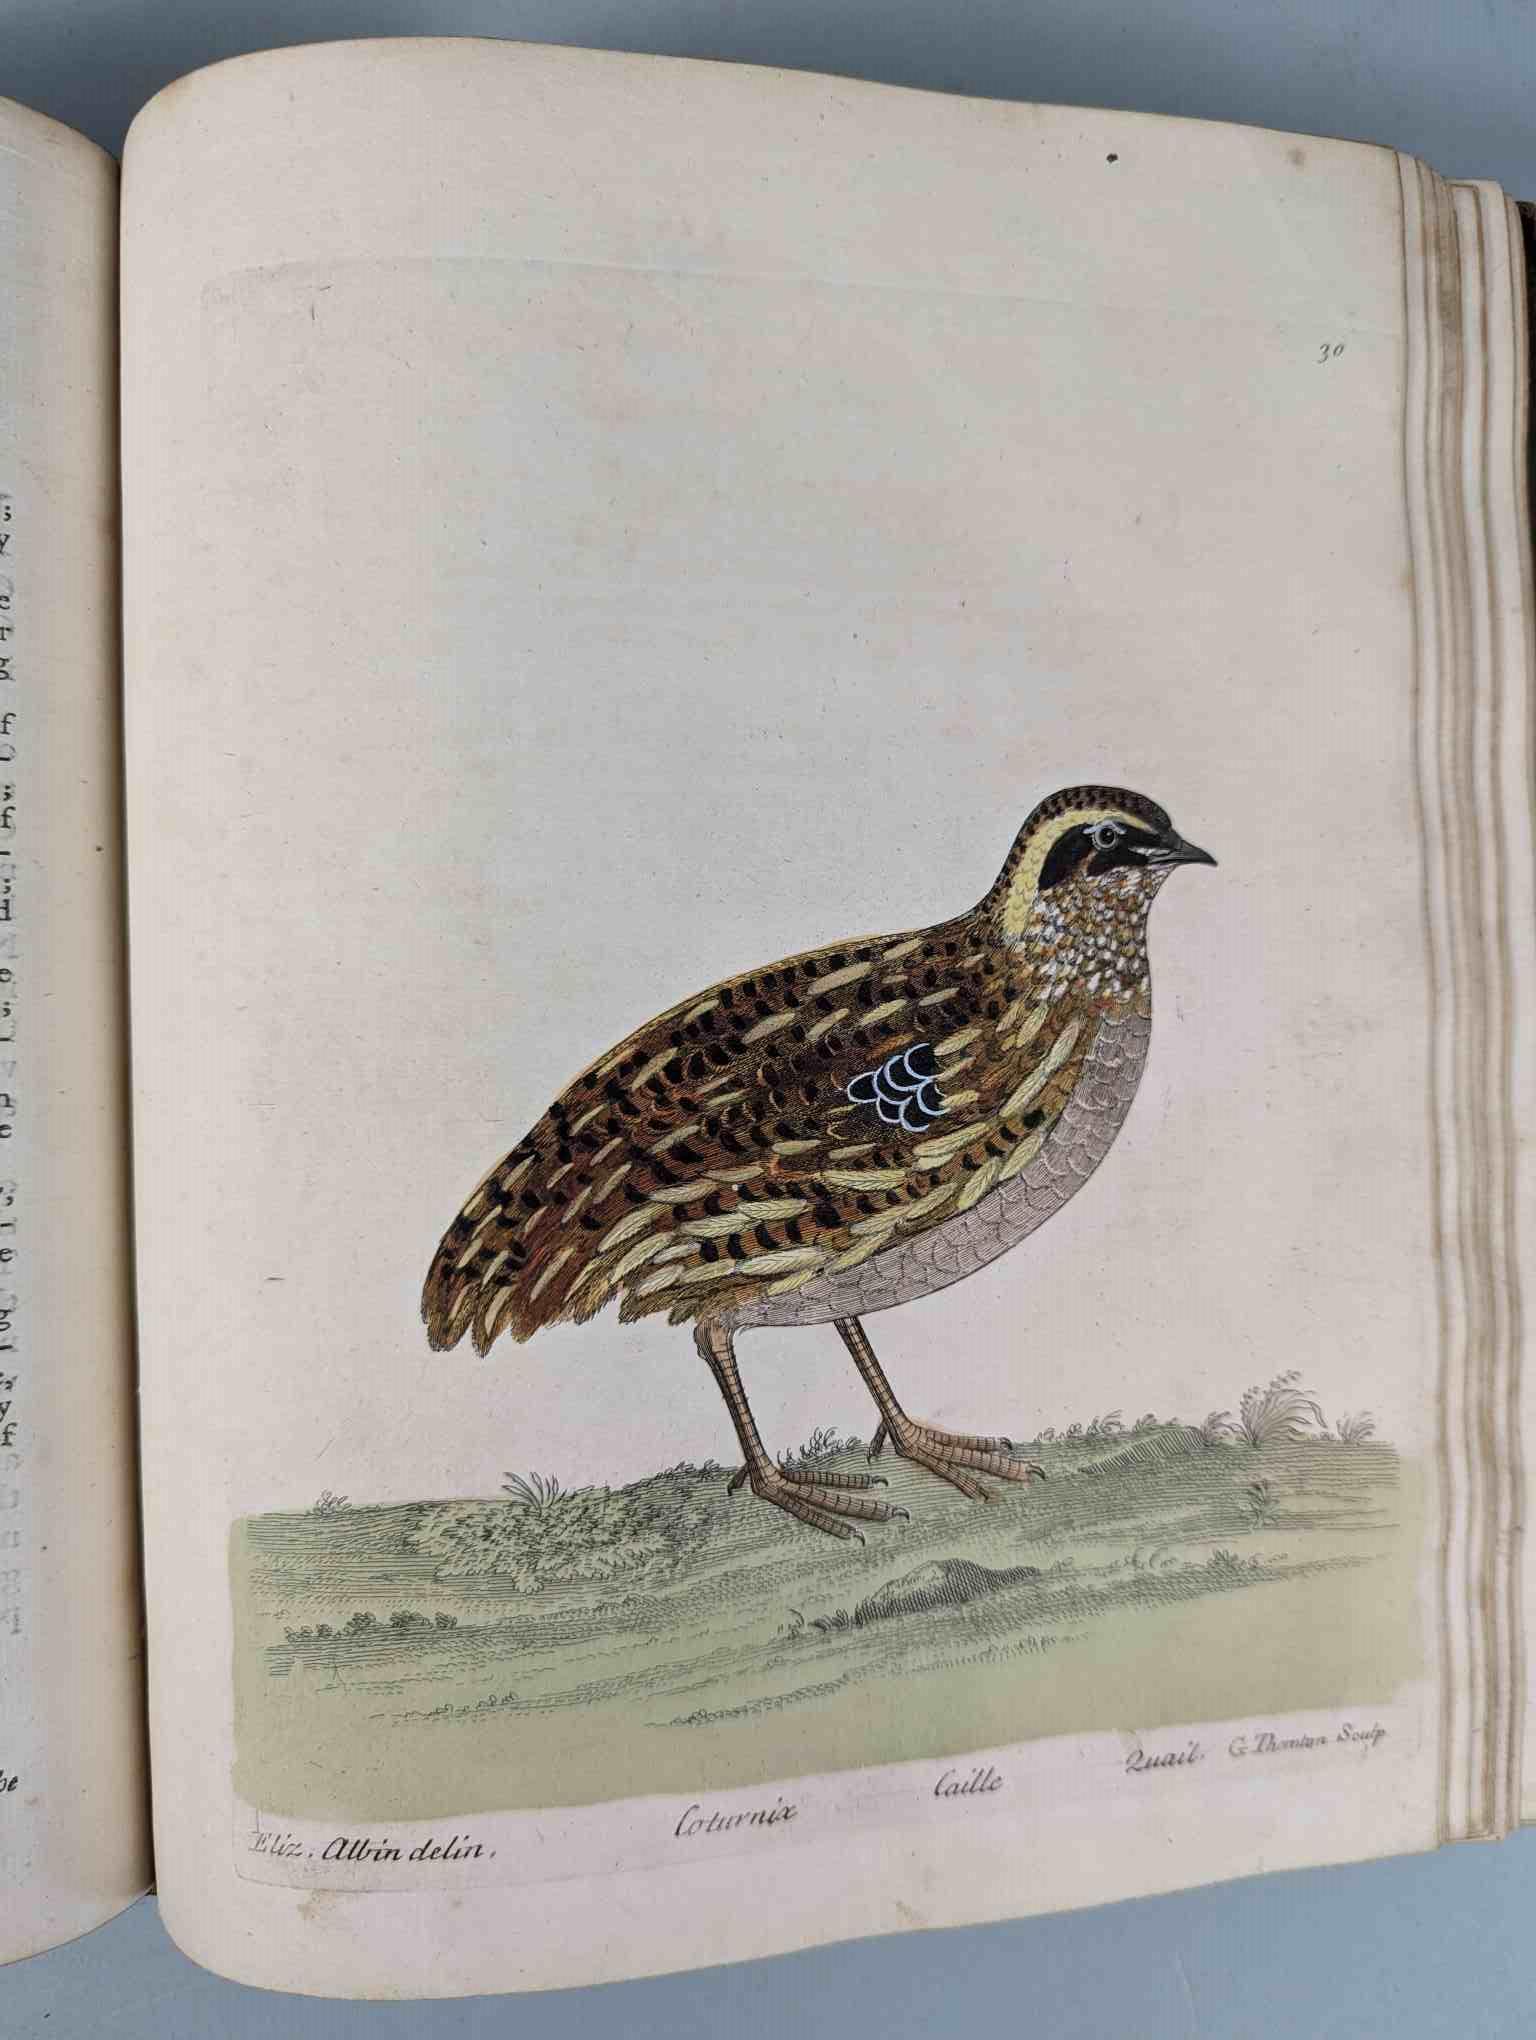 ALBIN, Eleazar. A Natural History of Birds, to which are added, Notes and Observations by W. - Image 33 of 208